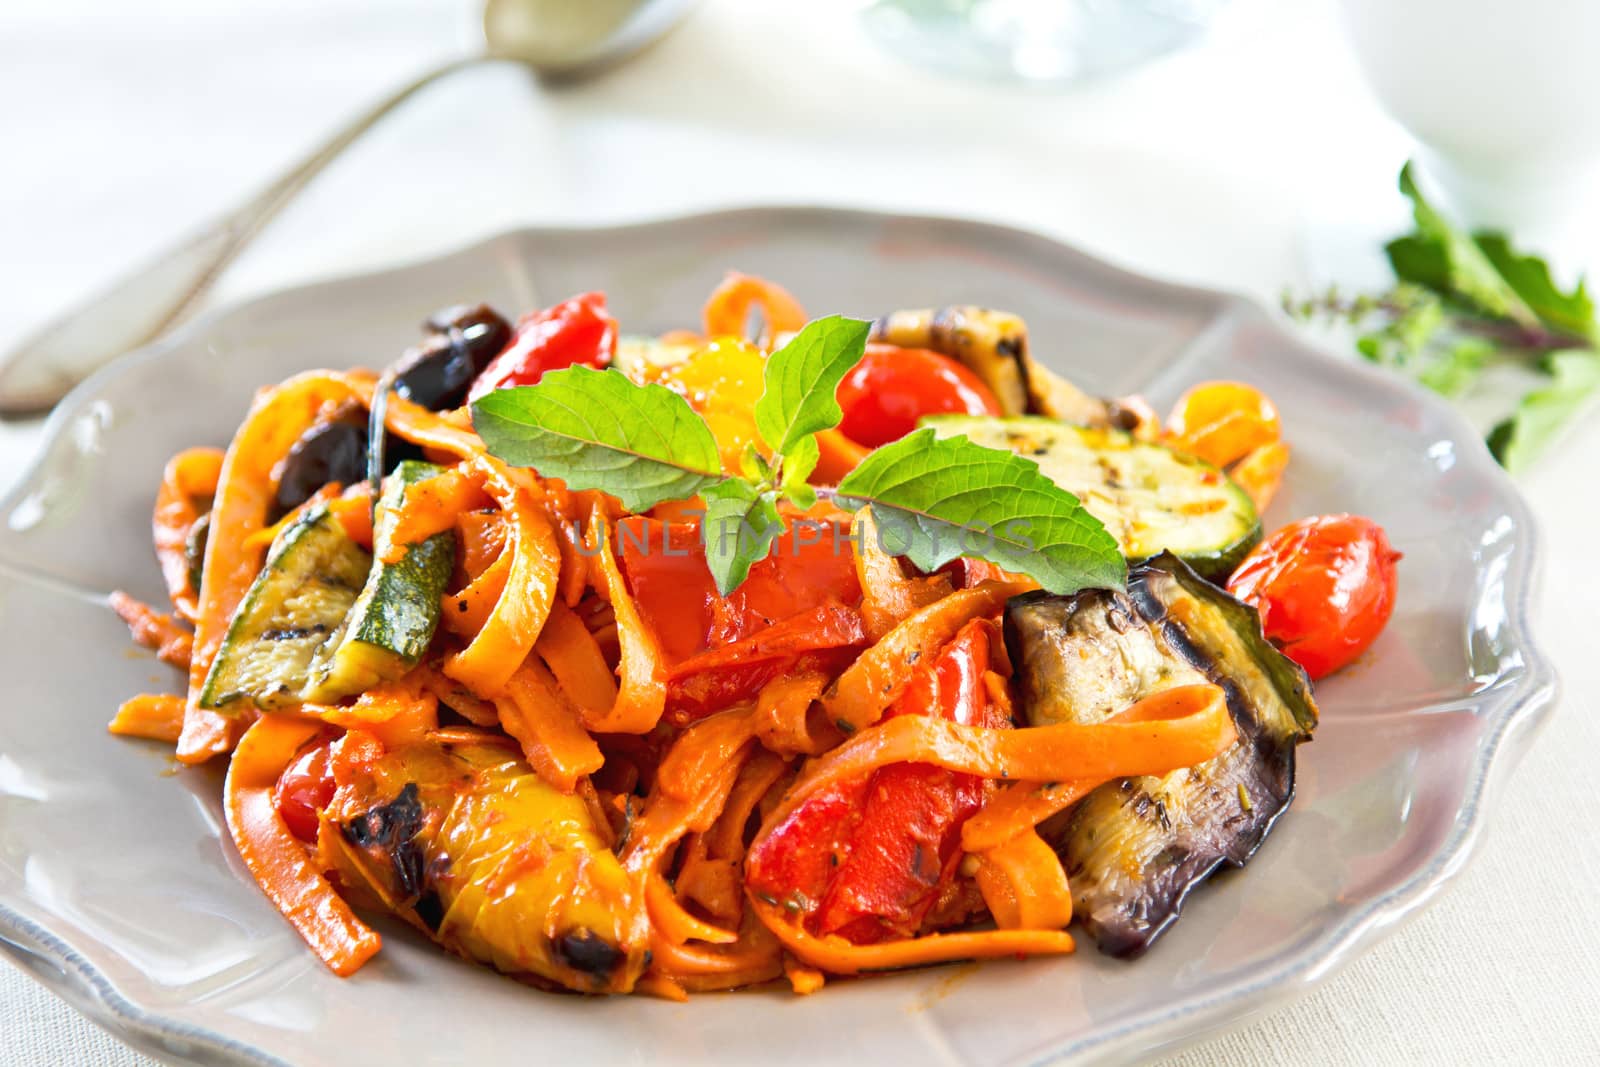 Fettuccine with grilled vegetables and tomato sauce by vanillaechoes